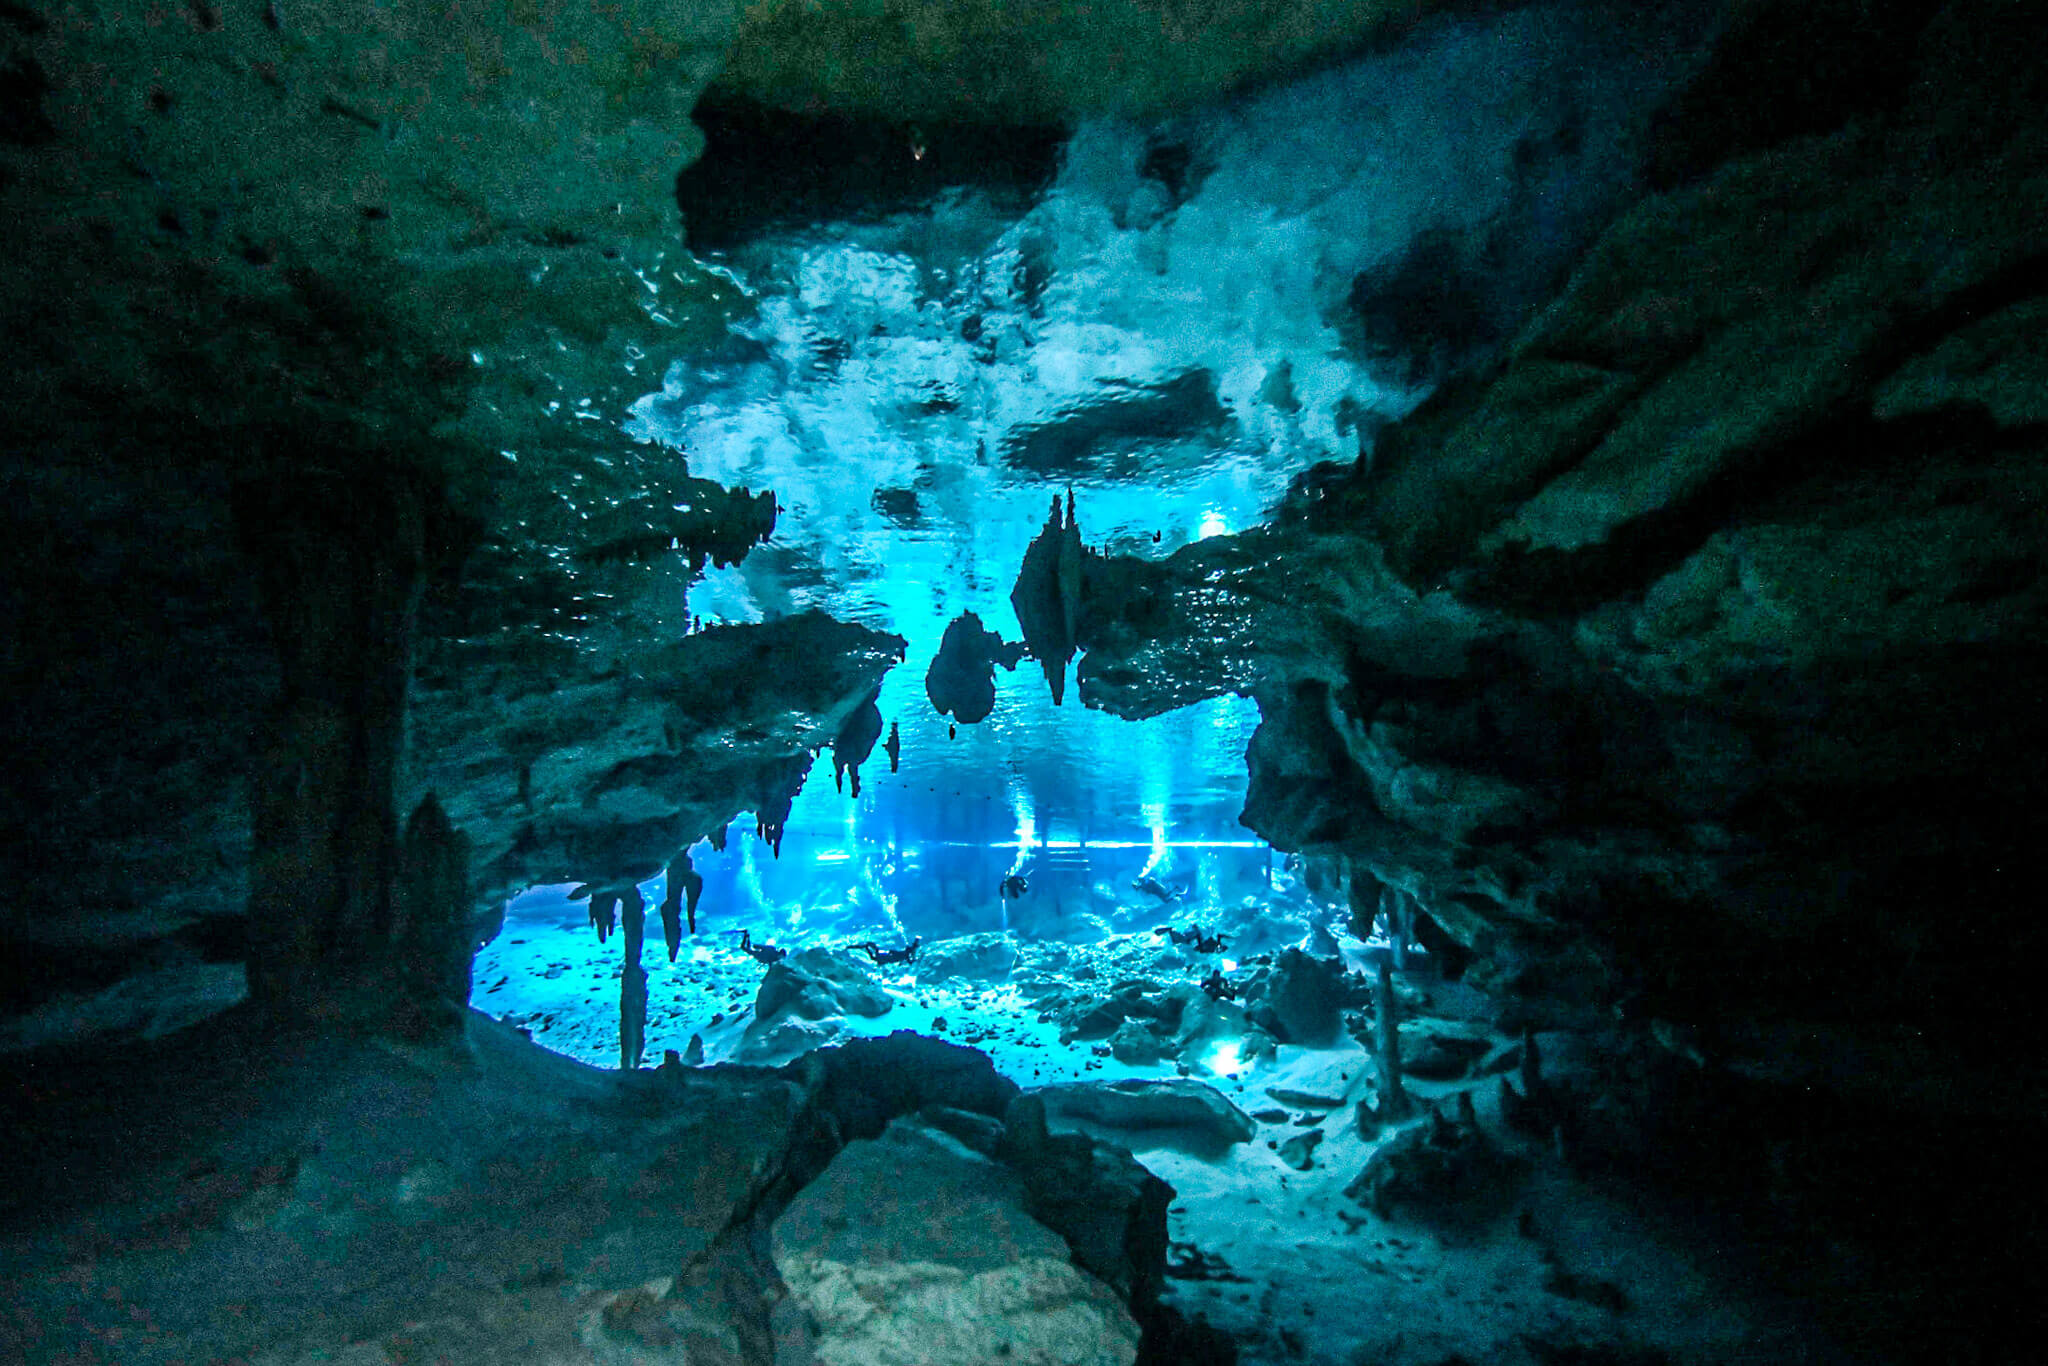 The light entering the submerged cavern at the Dos Ojos cenote entrance